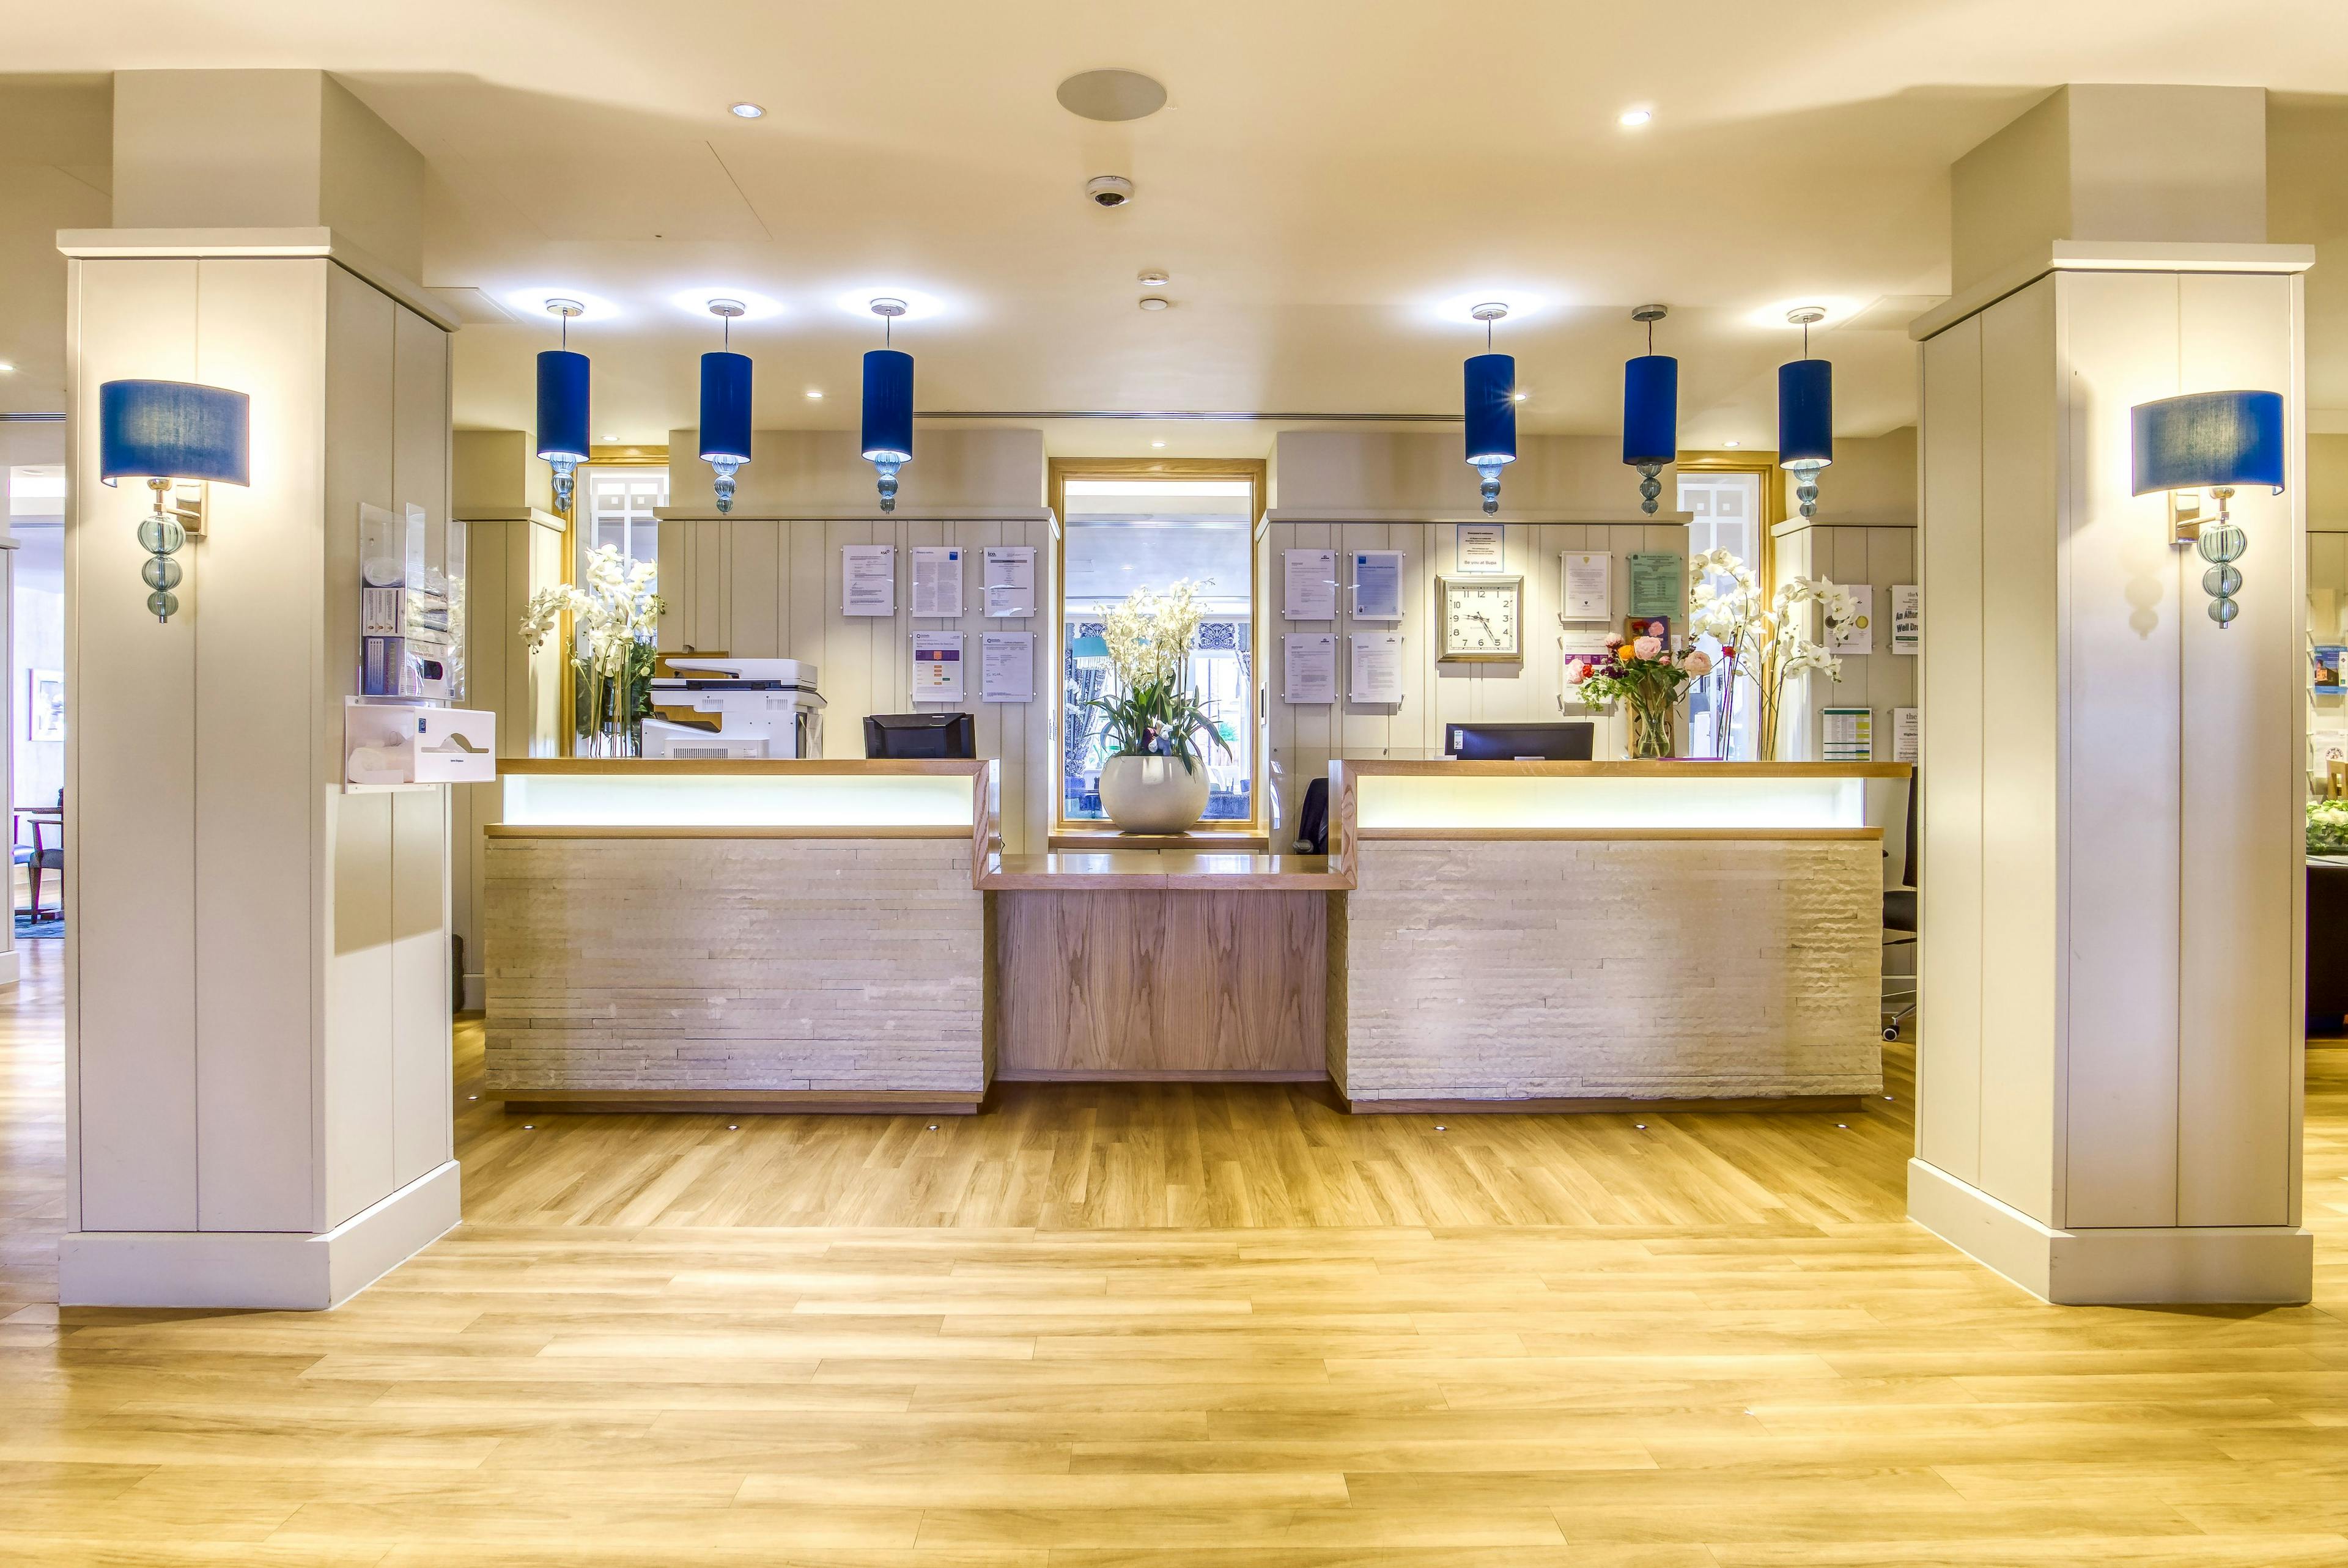 Reception of Aston-on-Trent care home in Aston-on-Trent, Derbyshire